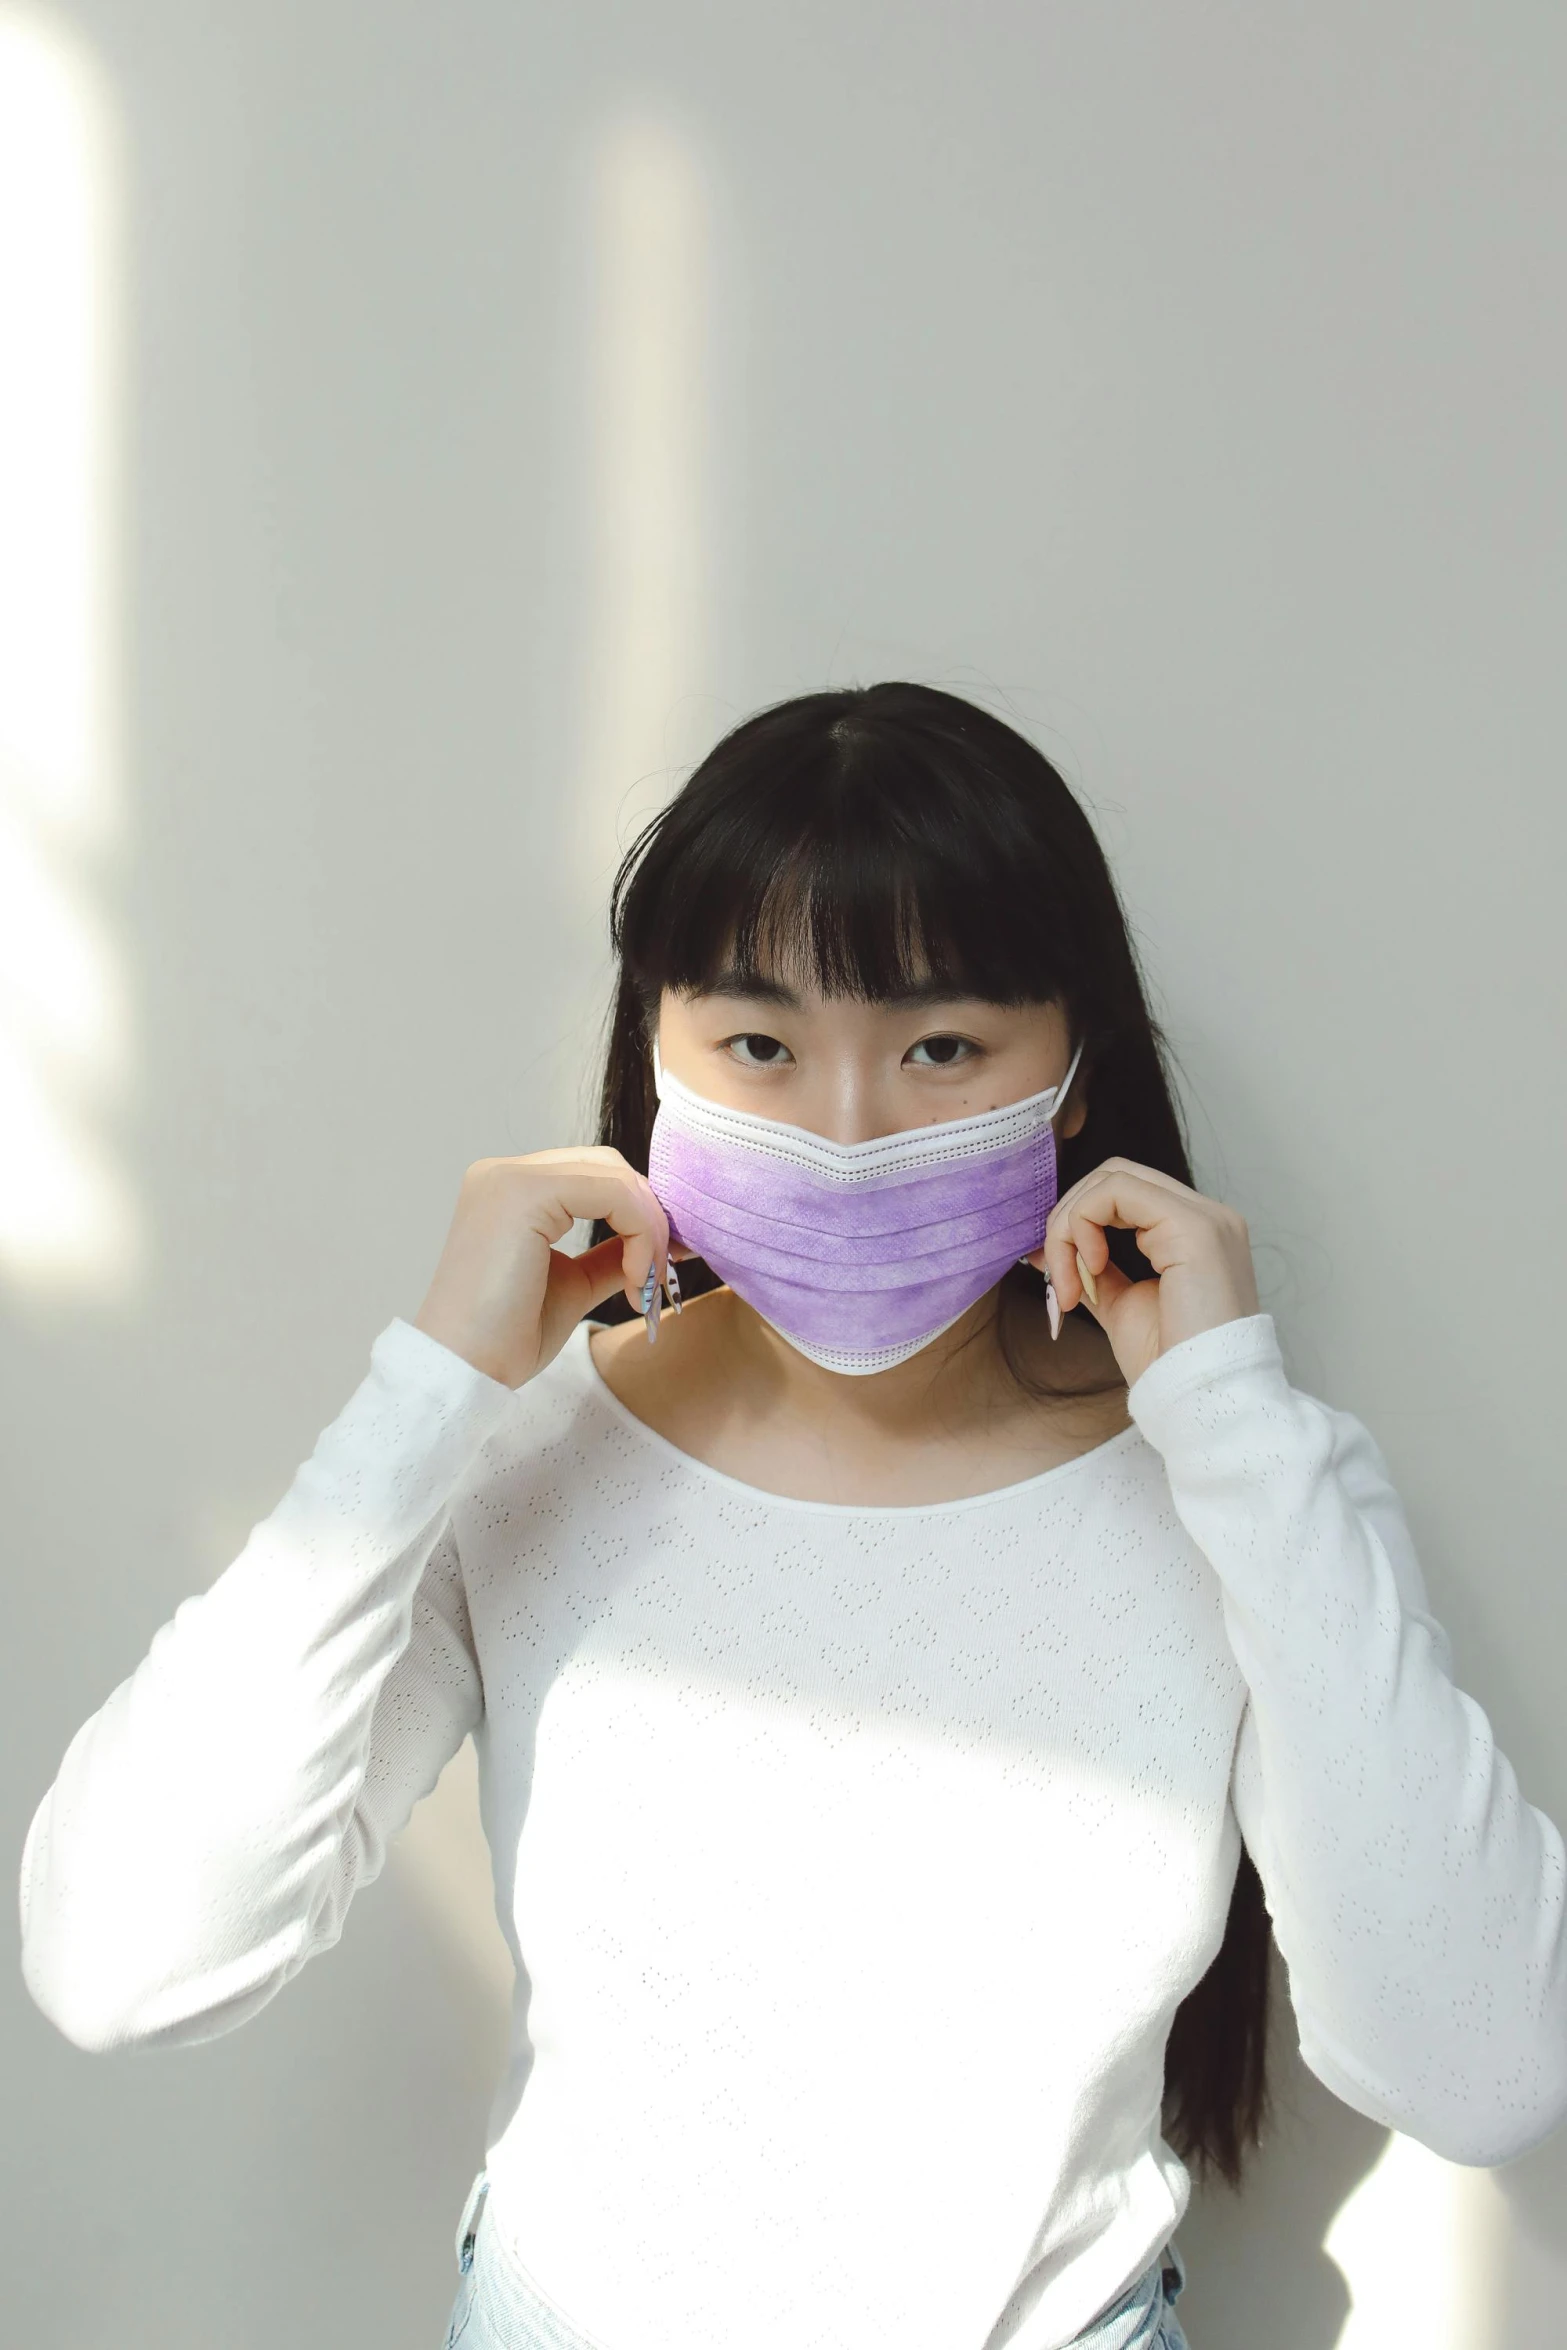 a woman in a white shirt and a purple mask, trending on pexels, shin hanga, wearing purple undershirt, soft volume absorbation, masked person in corner, from china